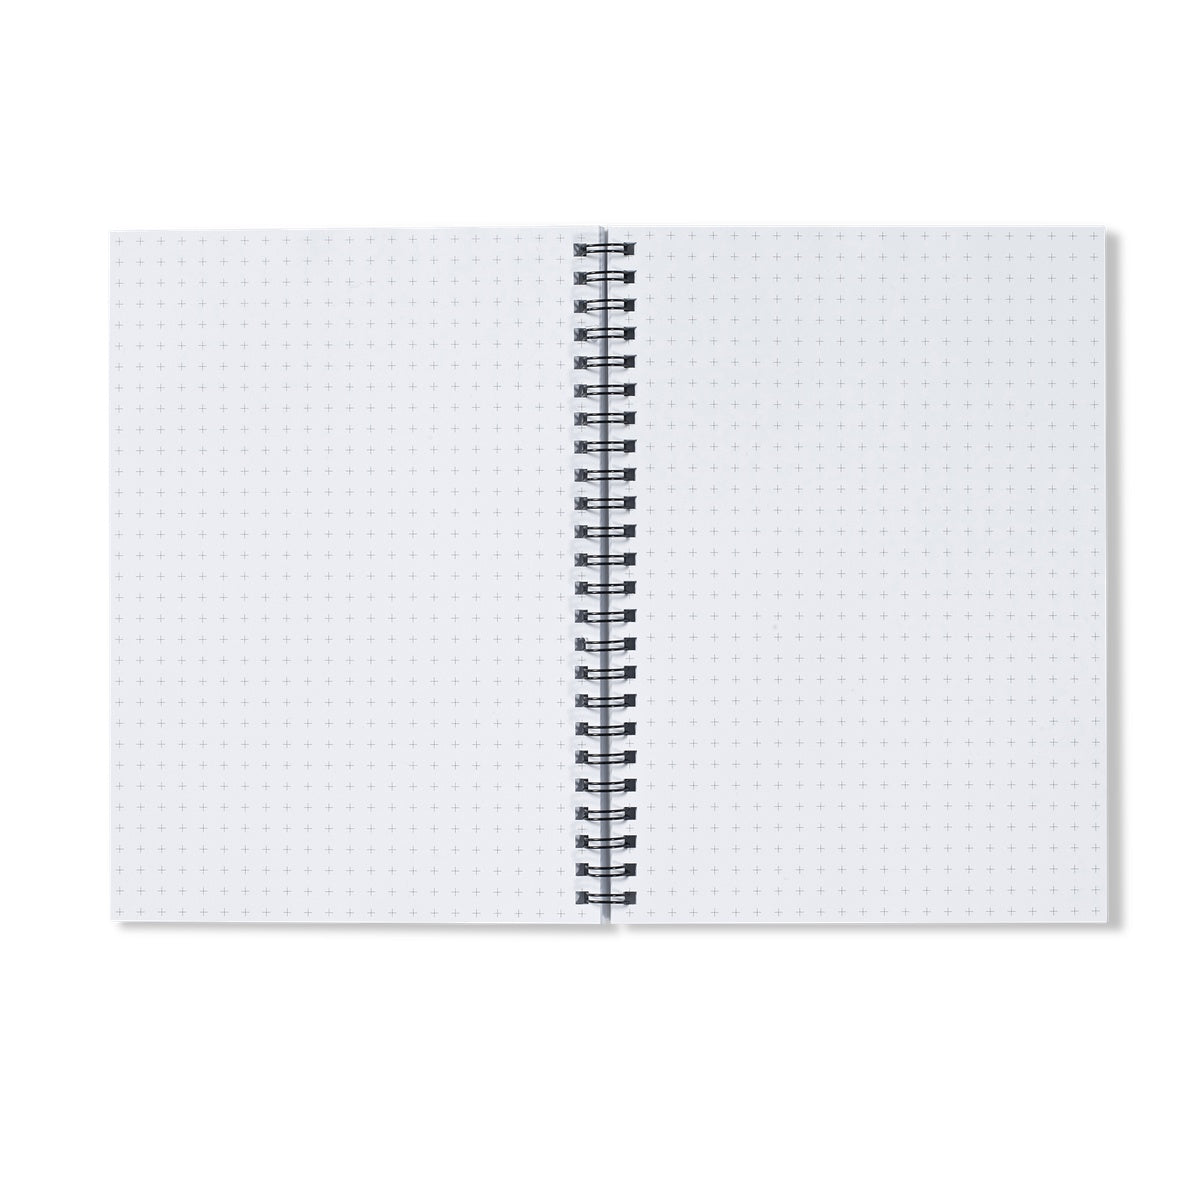 Limestone and Ivy Notebook